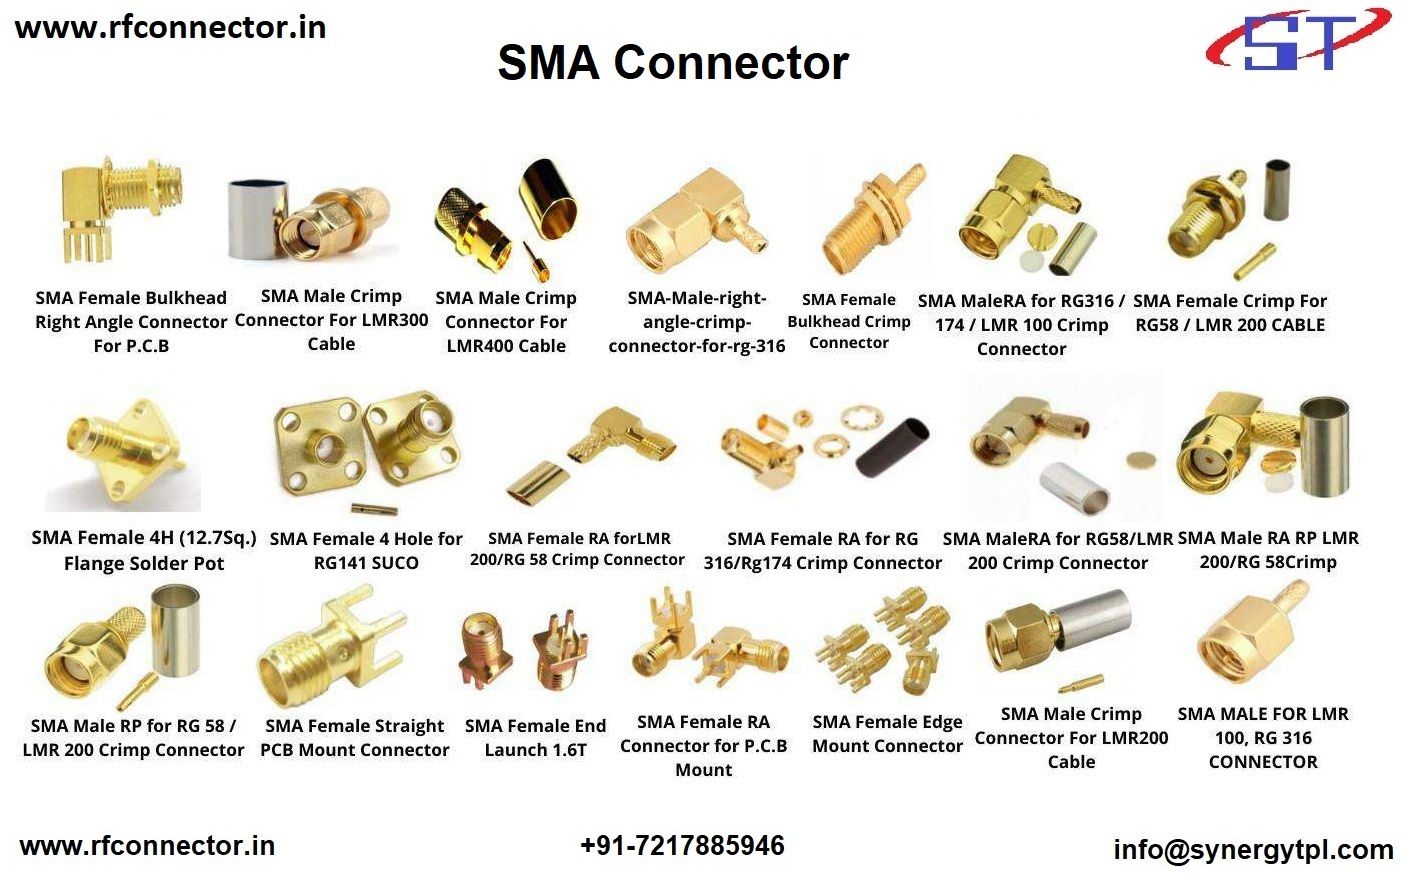 SMA Female RIGHT ANGLE Connector for LMR 100 cable